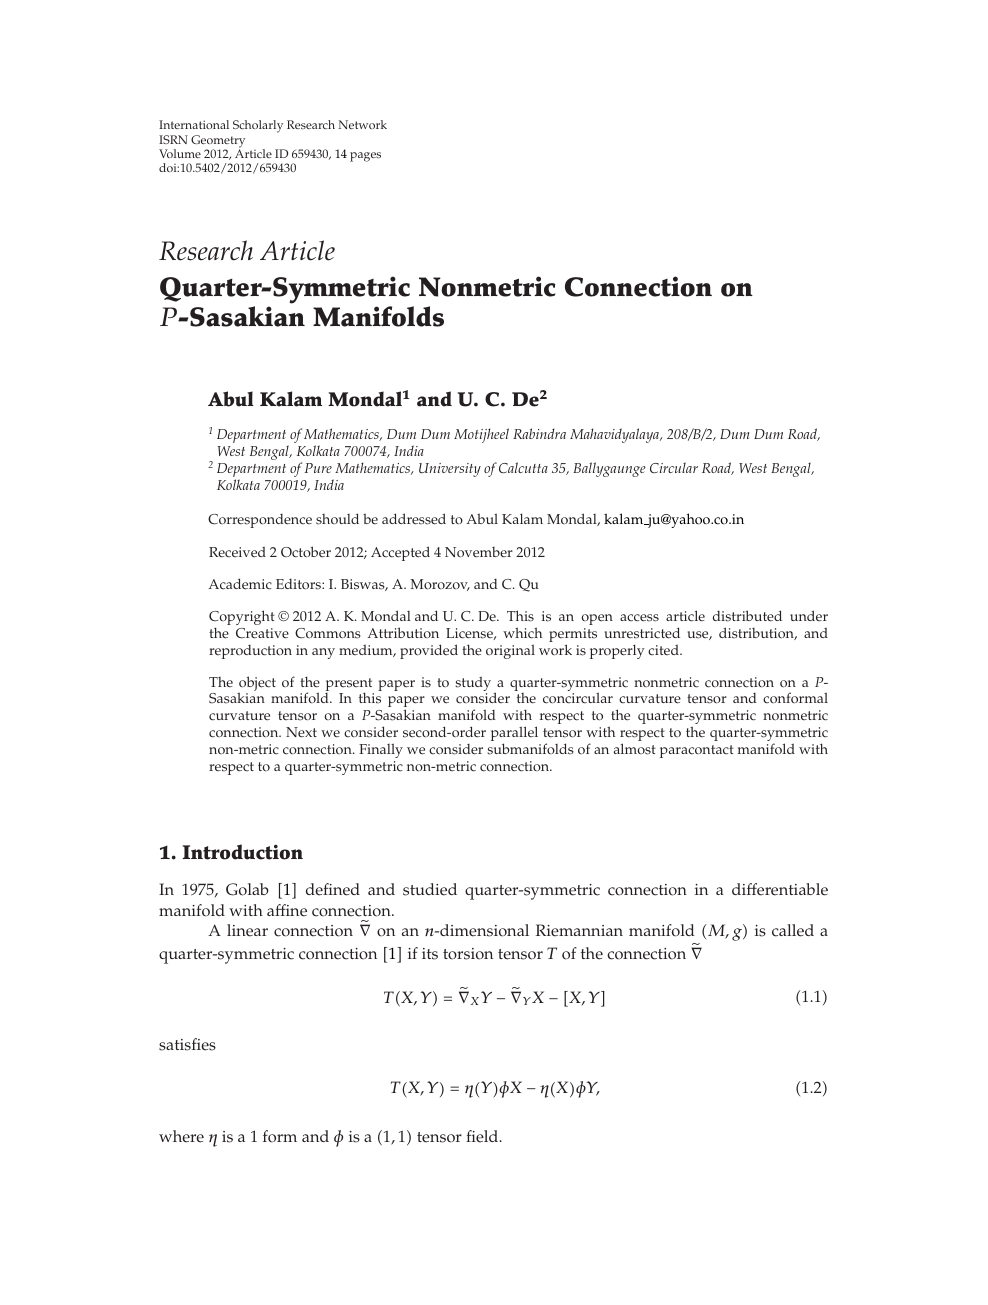 Quarter Symmetric Nonmetric Connection On Sasakian Manifolds Topic Of Research Paper In Mathematics Download Scholarly Article Pdf And Read For Free On Cyberleninka Open Science Hub